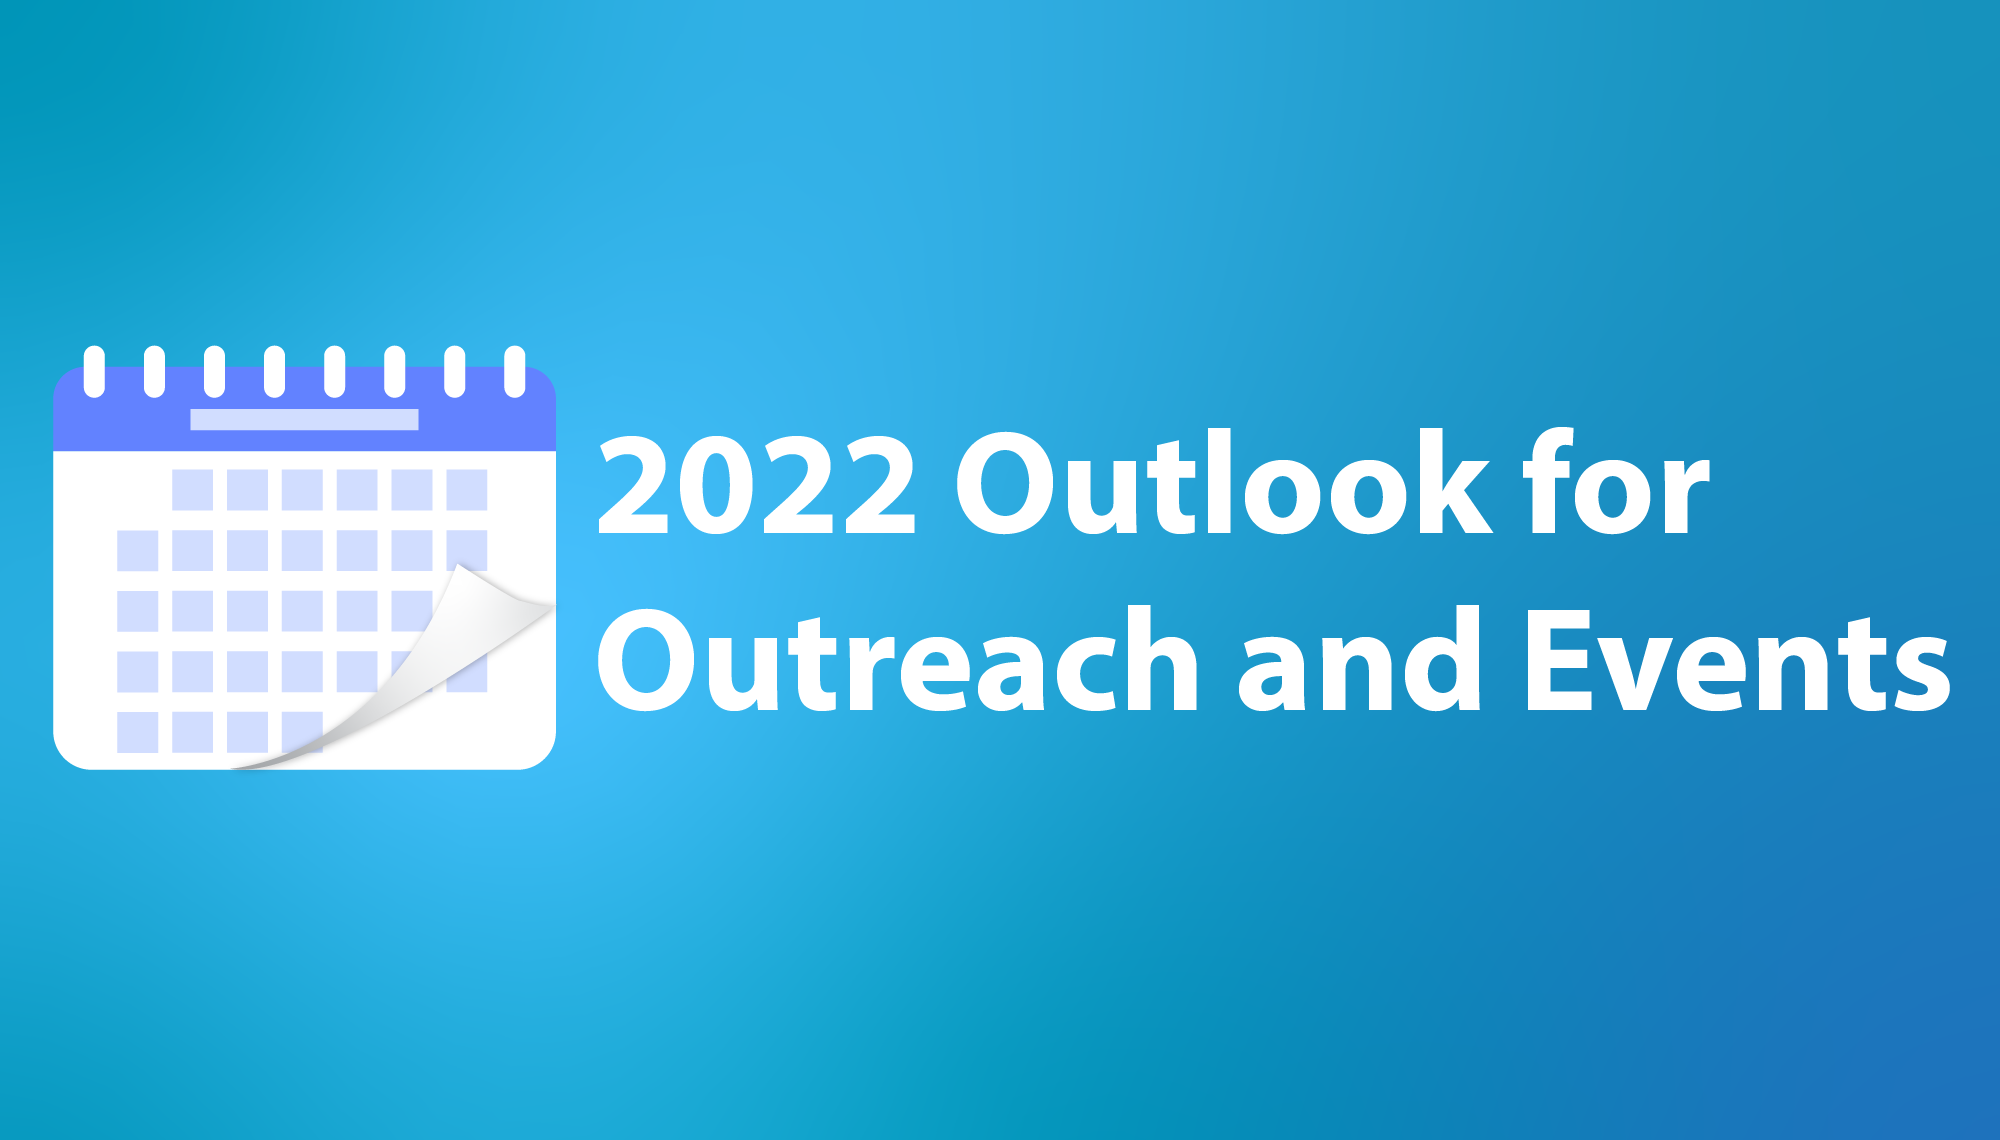 2022 Outlook for Outreach and Events